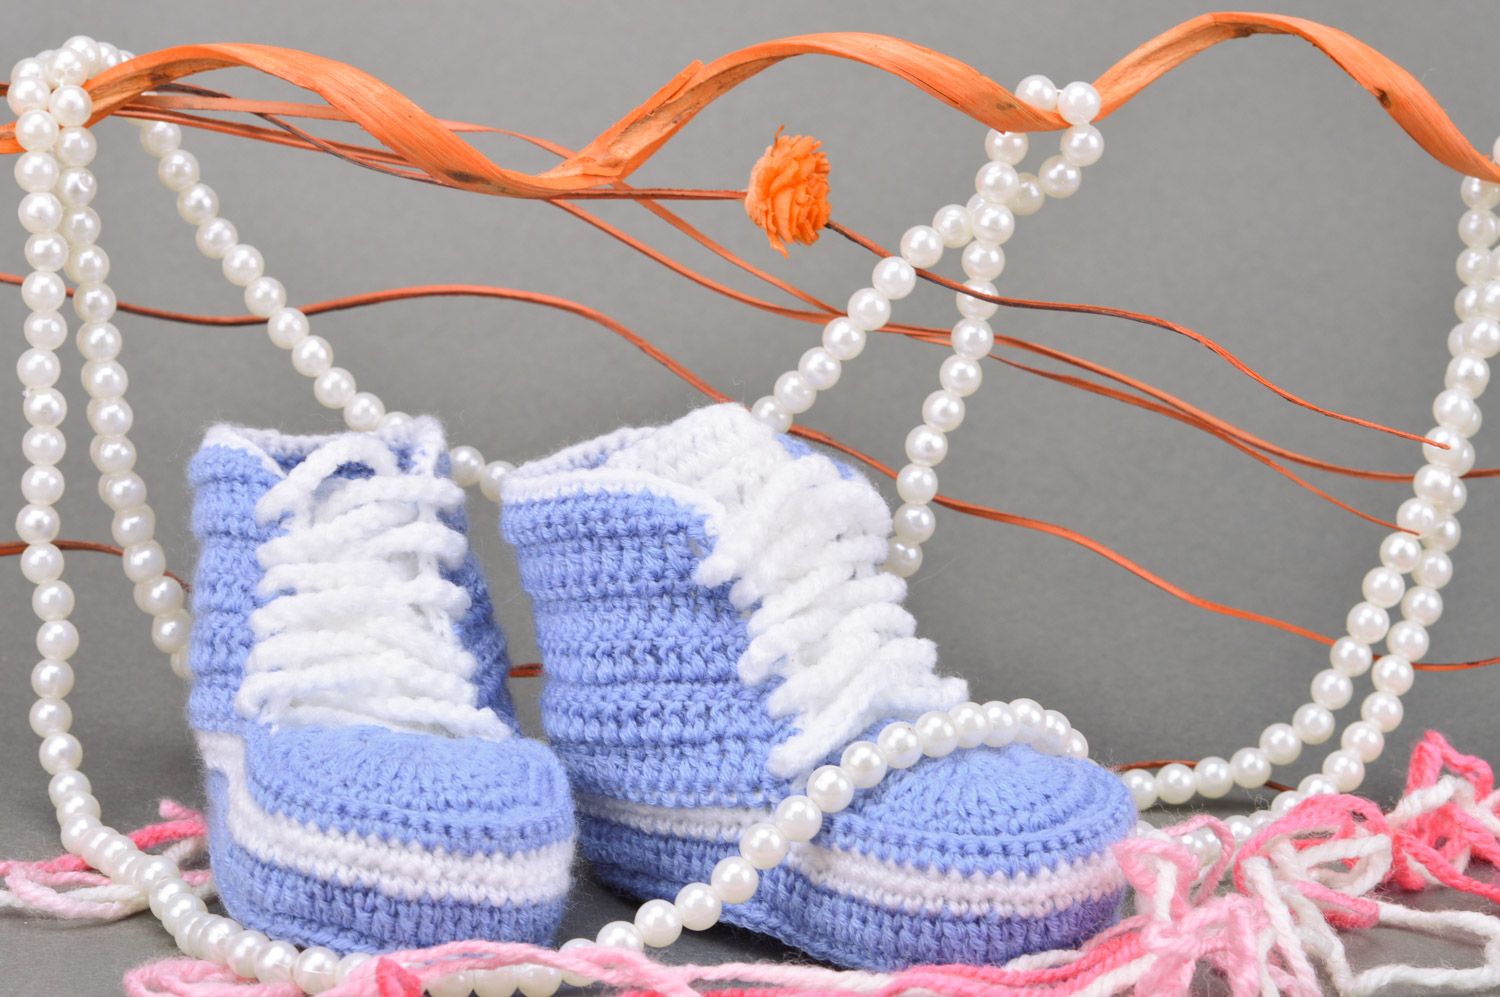 Handmade small crocheted blue baby sneakers with white shoelaces  photo 1